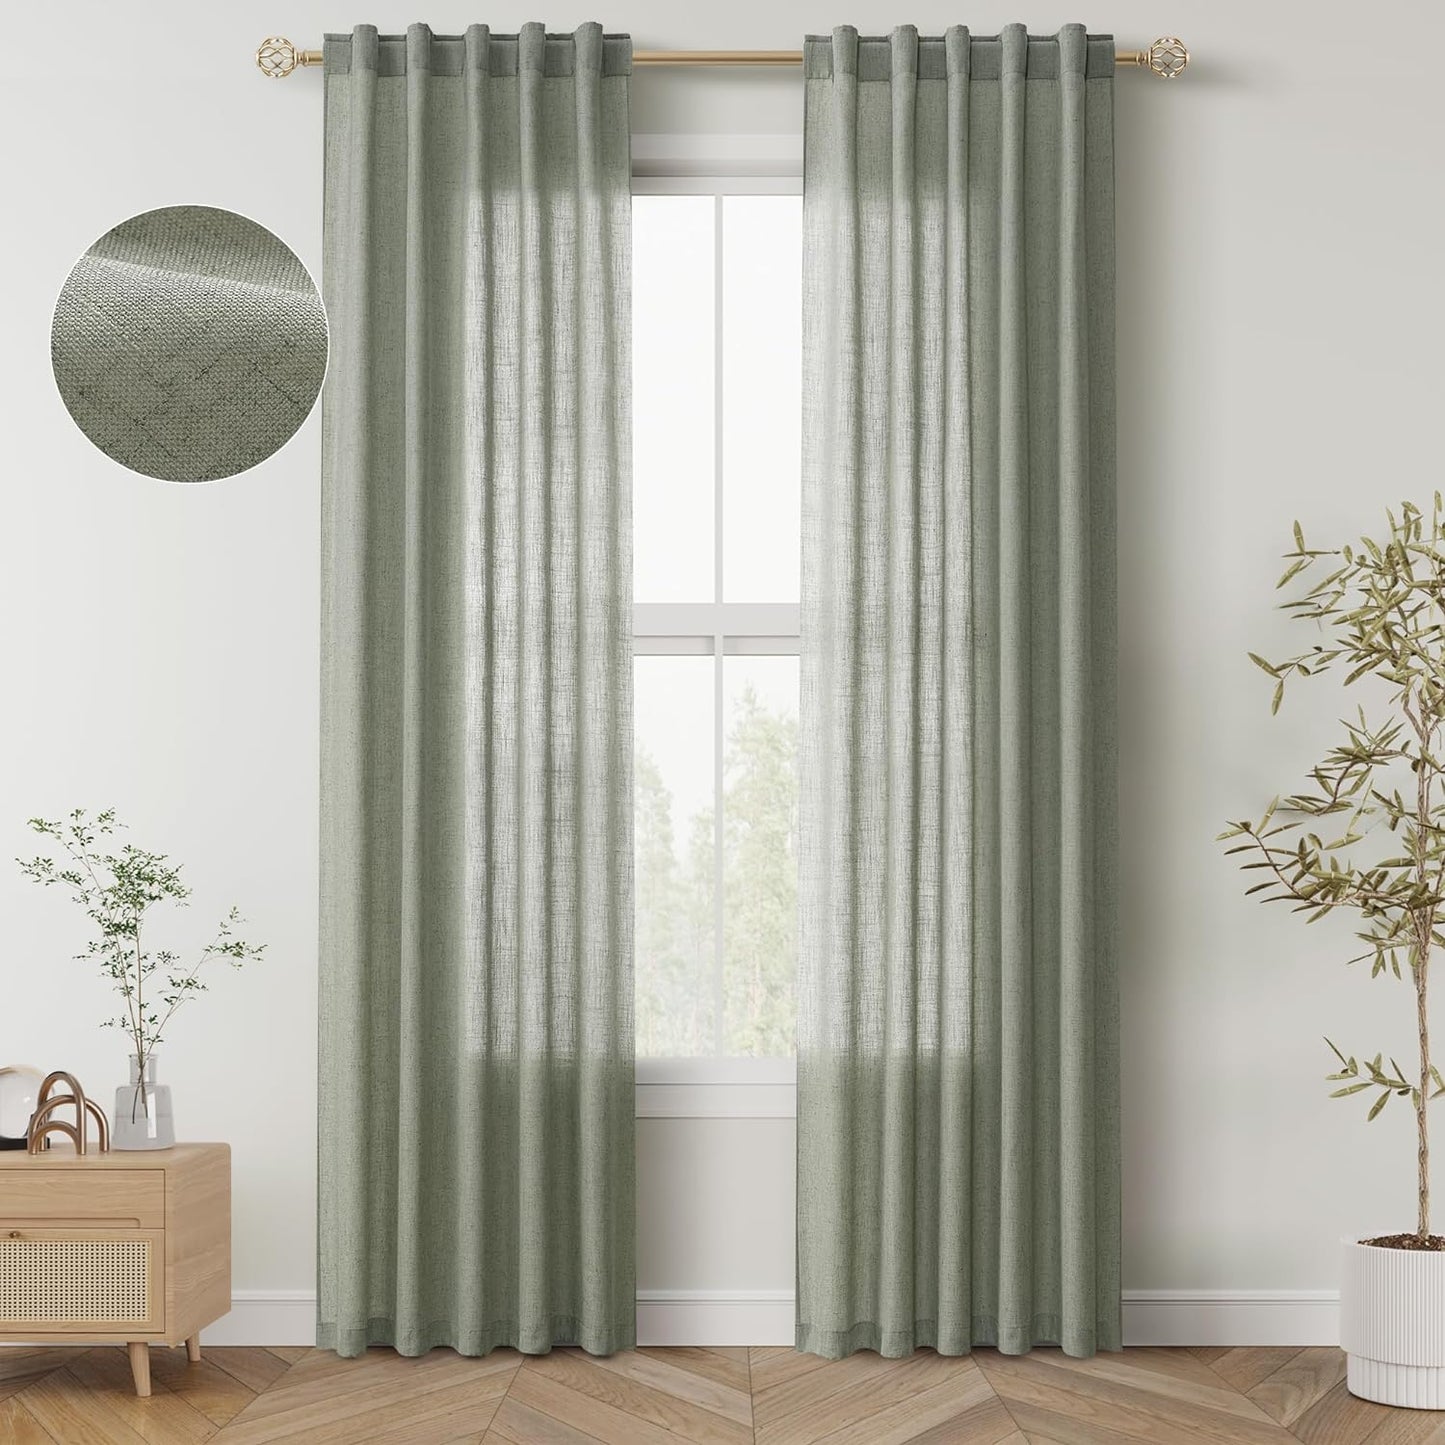 Natural Linen Sheer Curtains 84 Inch Long for Living Room Bedroom Back Tab Light Filtering Privacy Farmhouse Rod Pocket Ivory off White Neutral Drapes with Hooks 2 Panels Cream Beige  SPWIY Sage Green 40W X 80L Inch X 2 Panels 